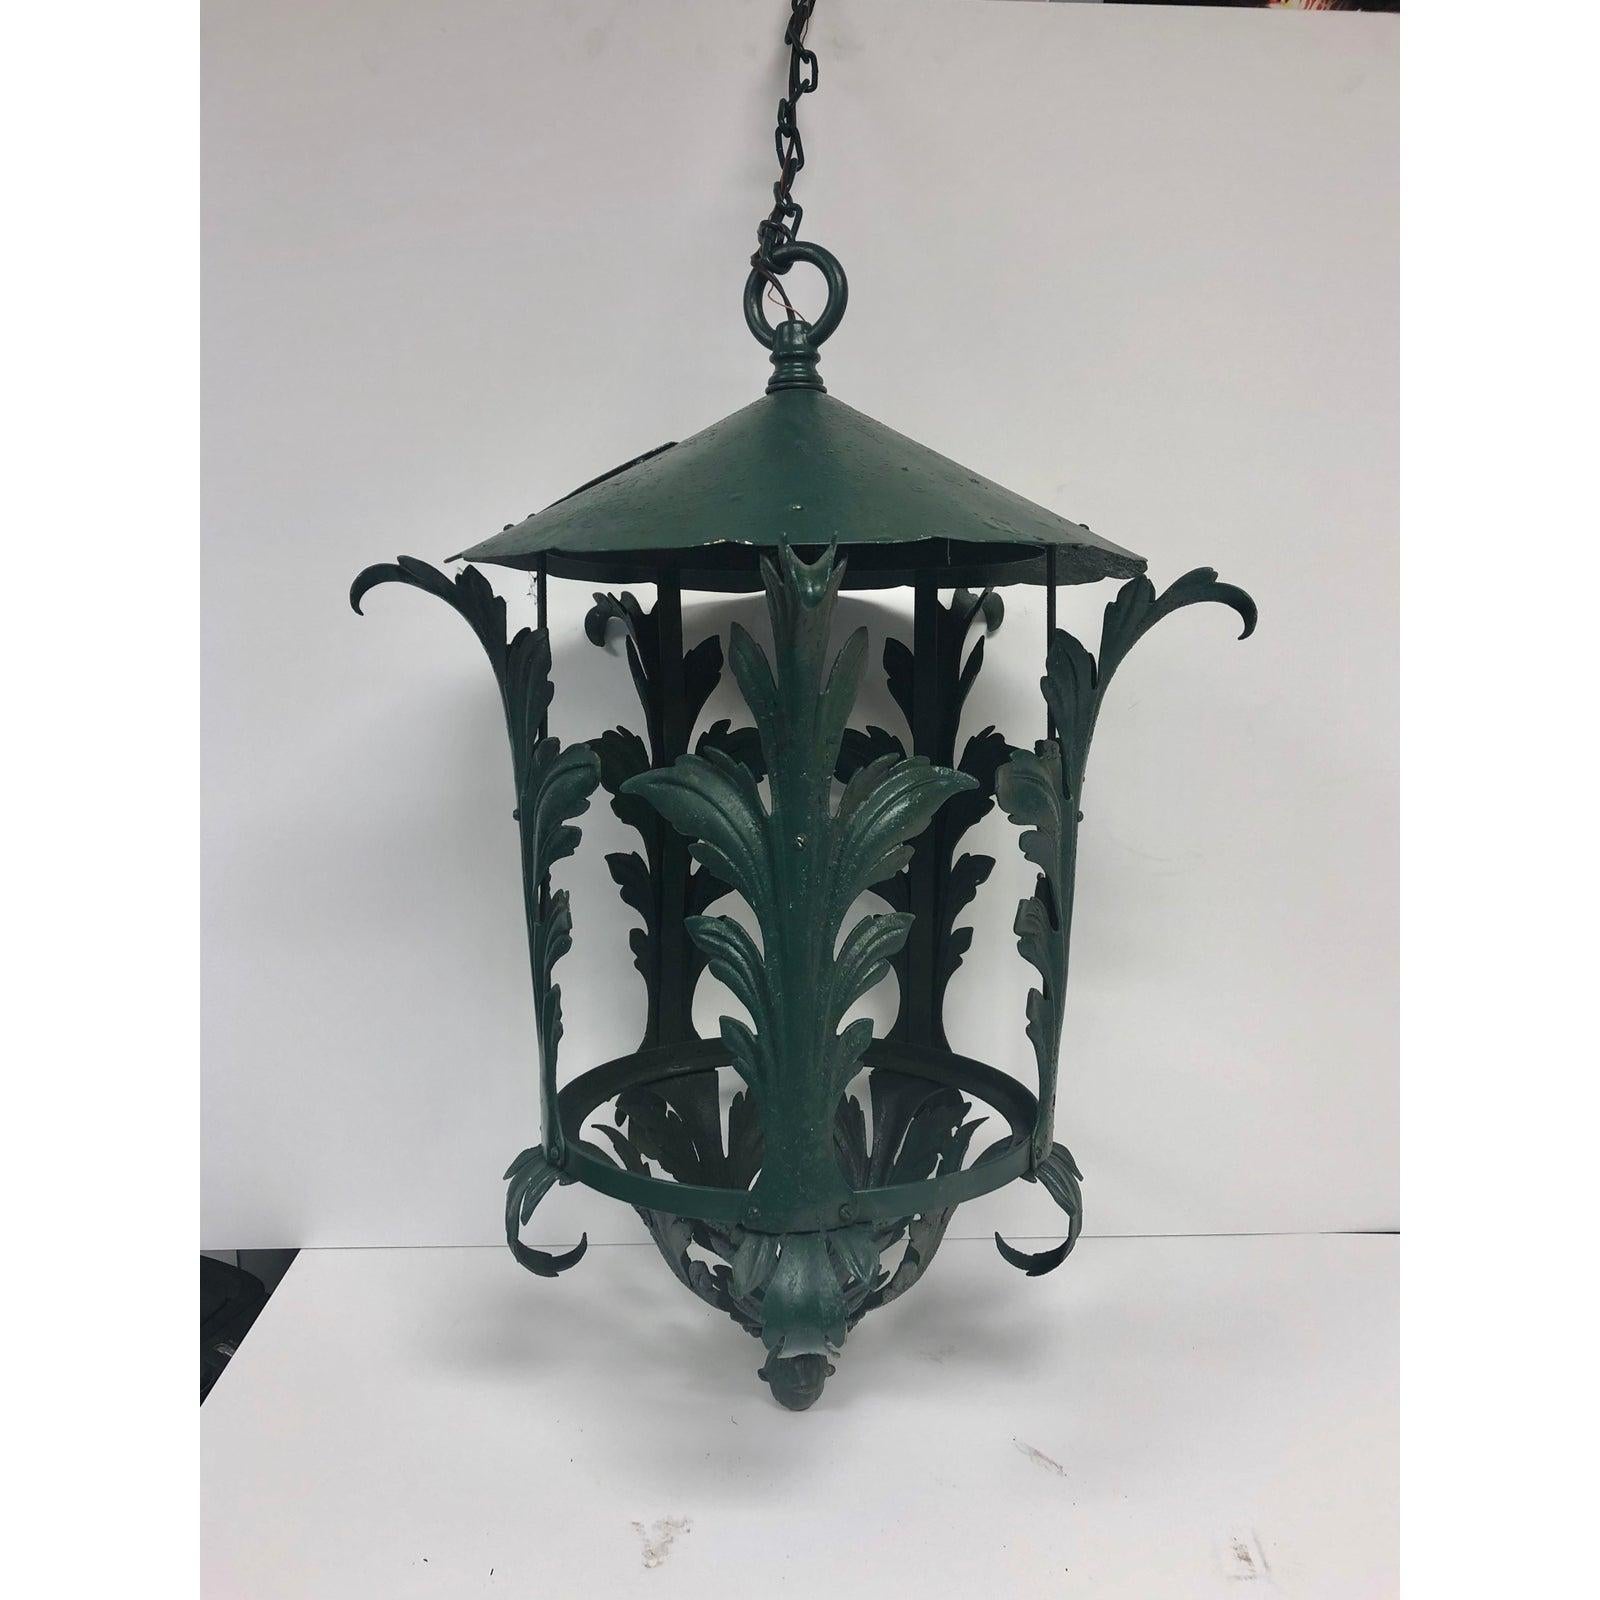 Beautiful French decorative metal lantern. We have 2 available. New wiring. It holds one reg. size bulb. Fixture H 32”, chain 34” l.